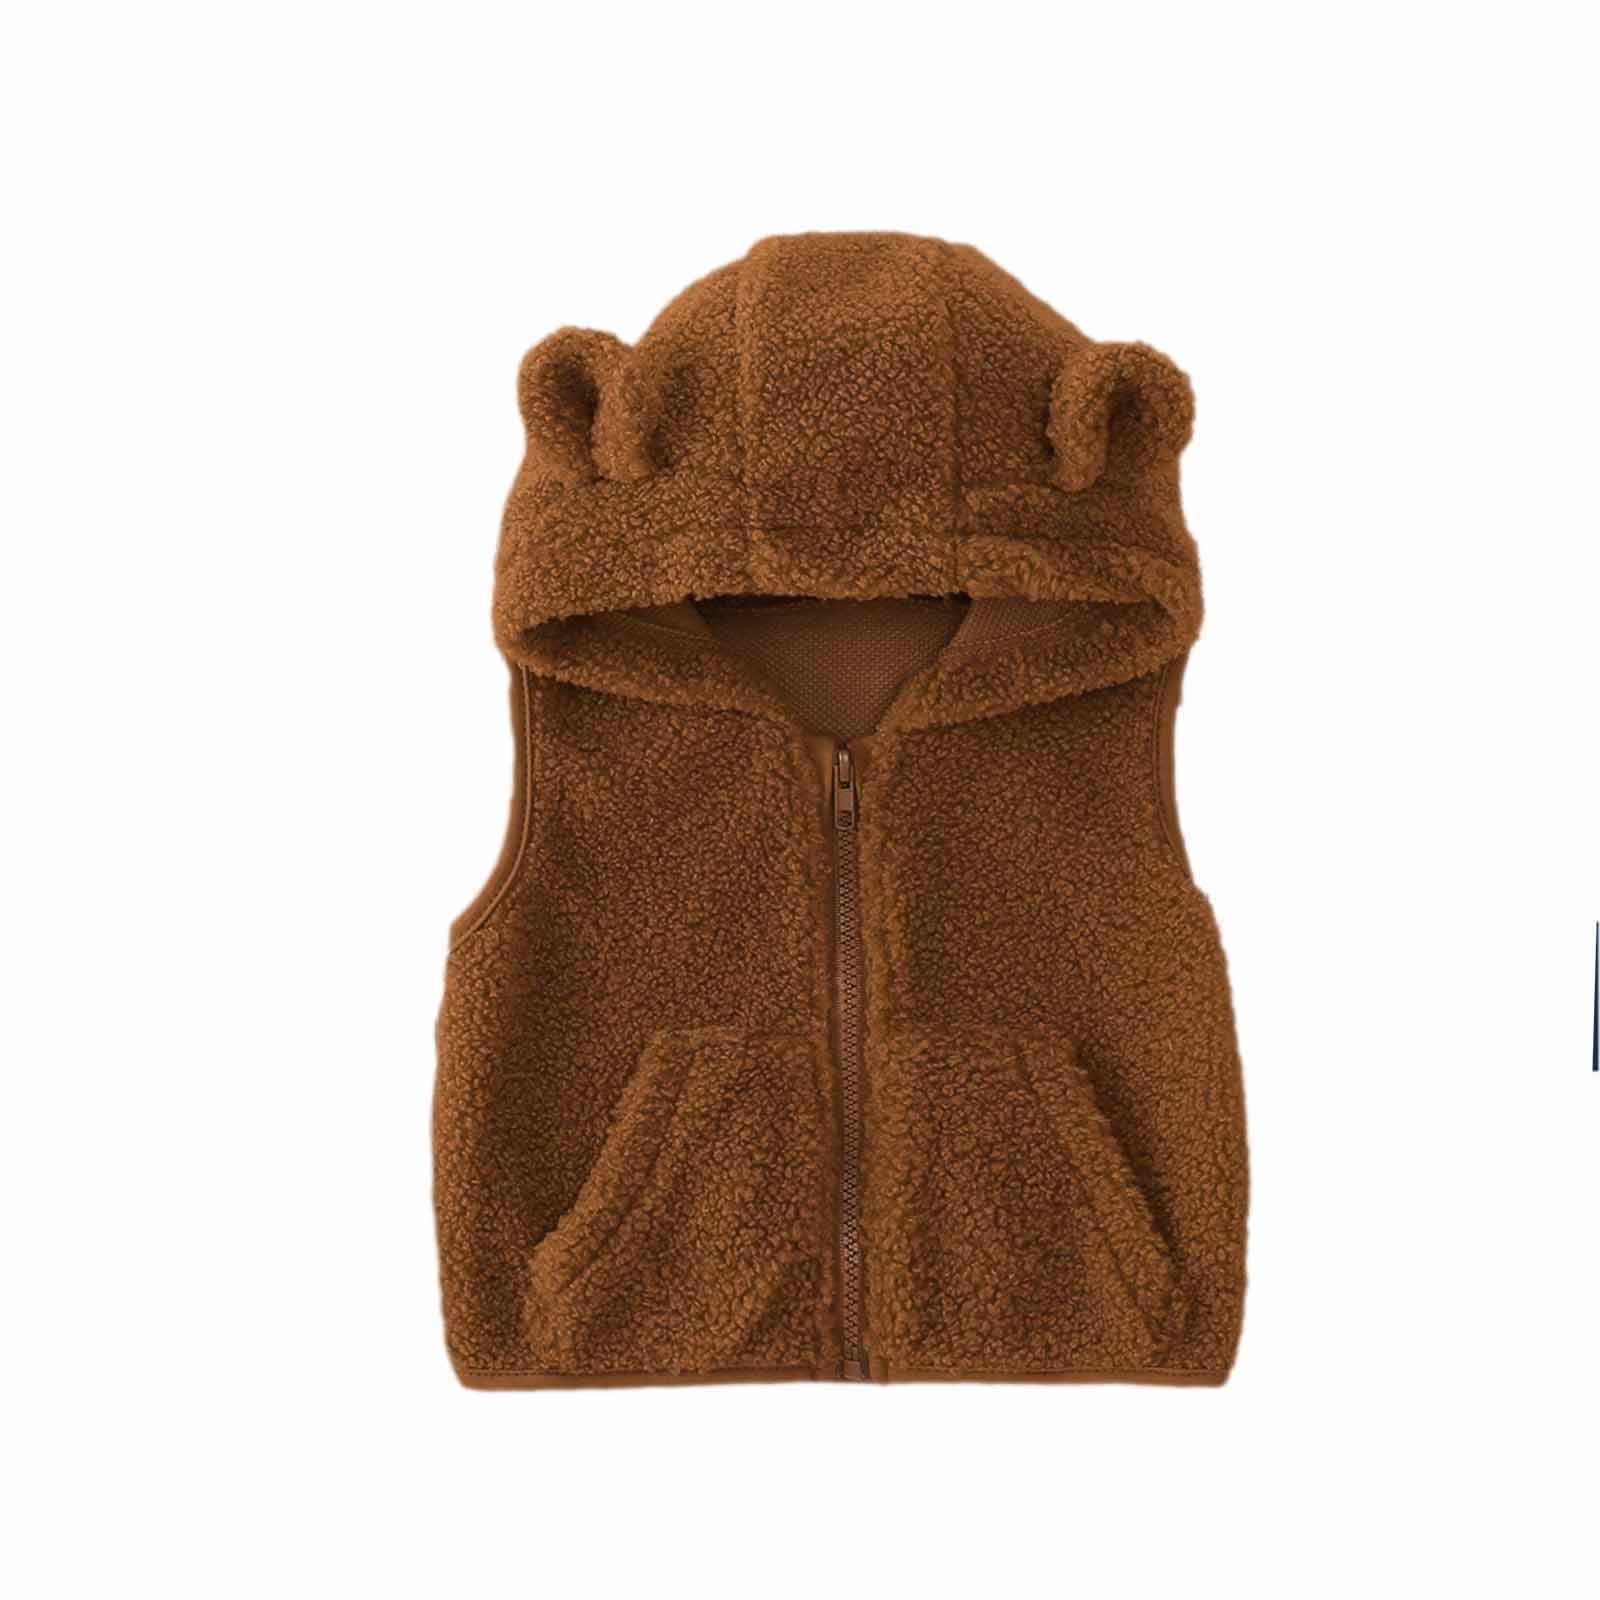 Baby Boys Girls Sherpa Stand Collar Vest Zip Up Fleece Fuzzy Sleeveless Toddler Fall Winter Warm Outerwear with Pockets 